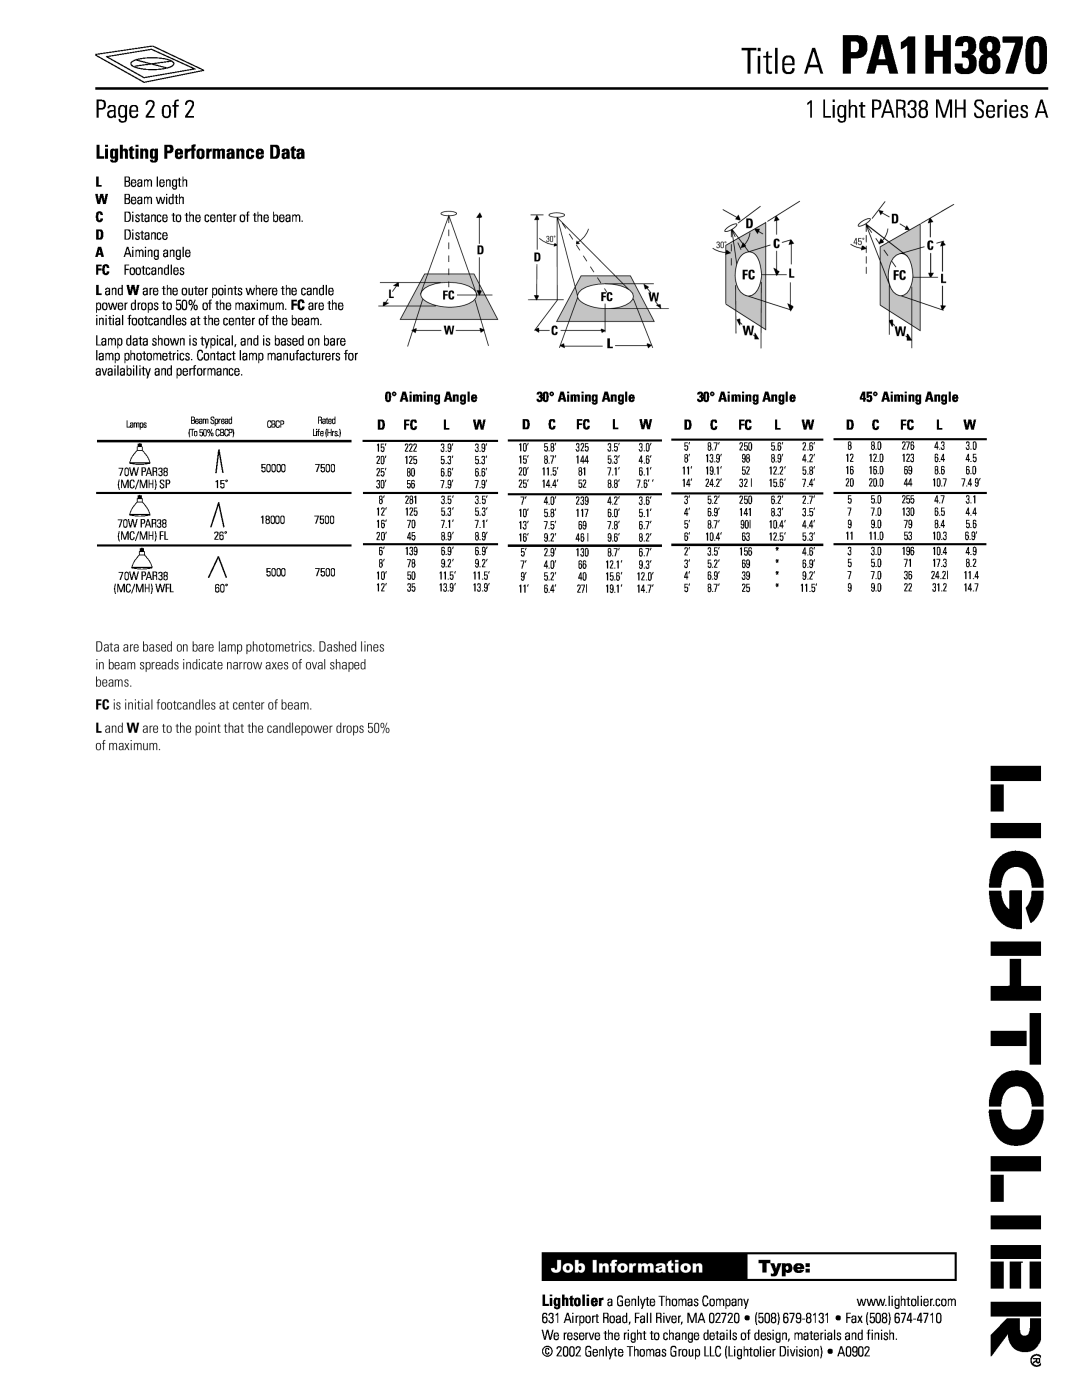 Lightolier manual Page 2 of, Light PAR38 MH Series A, Lighting Performance Data, Title A PA1H3870, Job Information, Type 